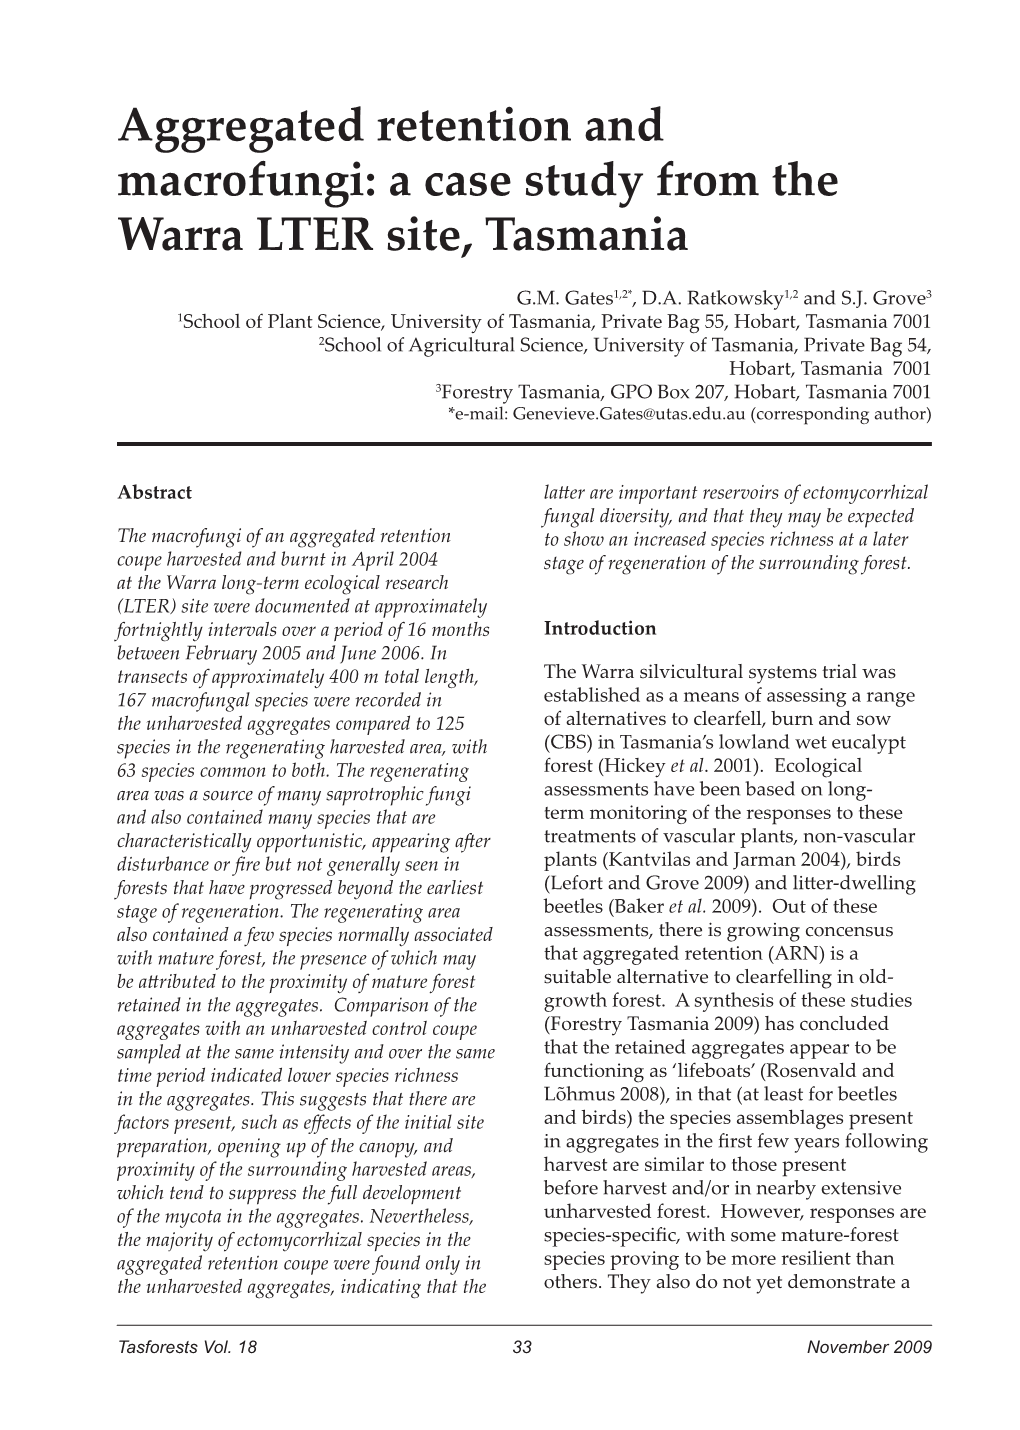 A Case Study from the Warra LTER Site, Tasmania